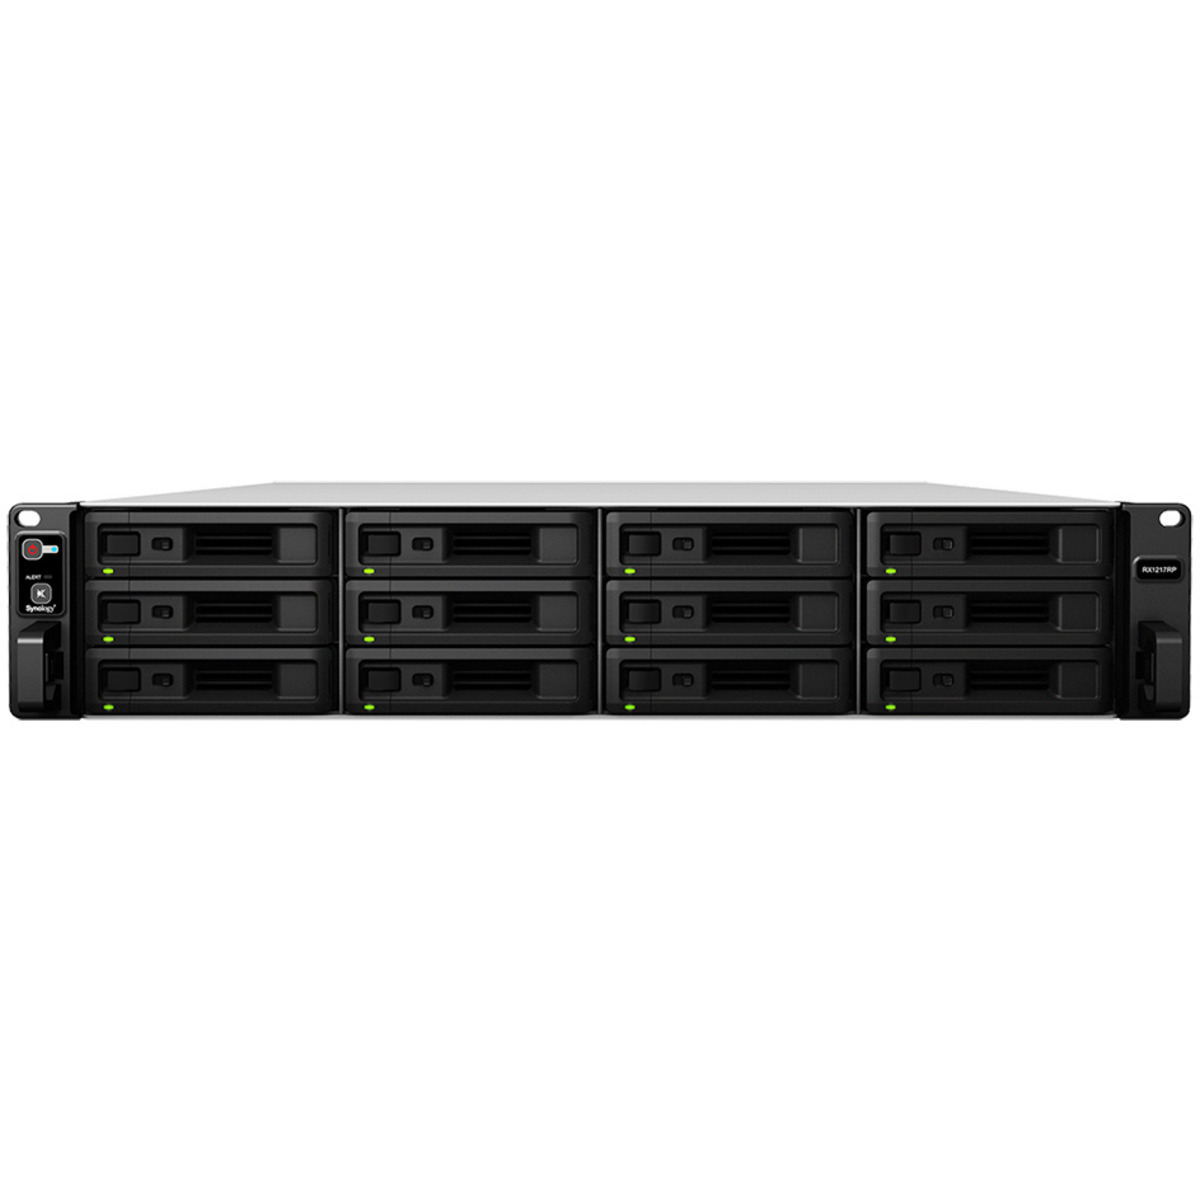 Synology RX1217 External Expansion Drive 12tb 12-Bay RackMount Large Business / Enterprise Expansion Enclosure 12x1tb Samsung 870 EVO MZ-77E1T0BAM 2.5 560/530MB/s SATA 6Gb/s SSD CONSUMER Class Drives Installed - Burn-In Tested RX1217 External Expansion Drive